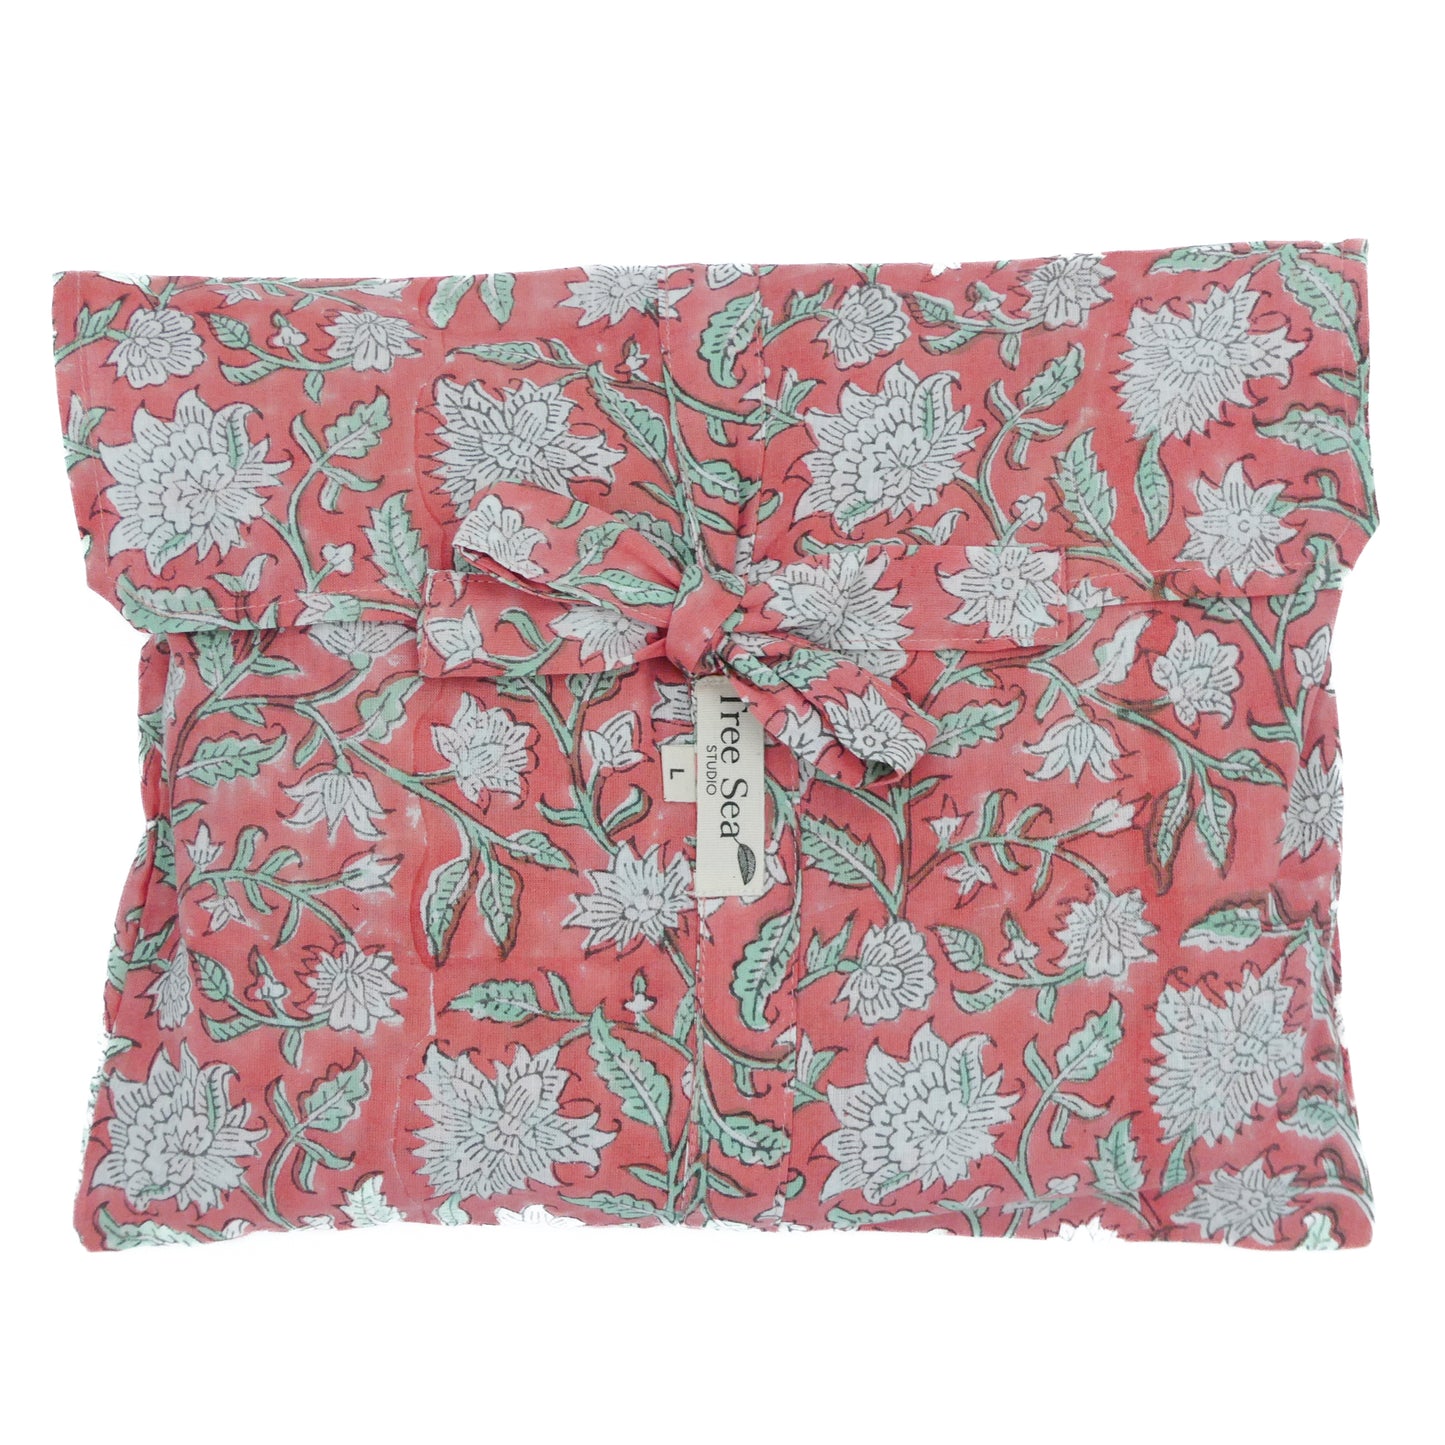 travel pouch for rose cotton pyjama with floral design